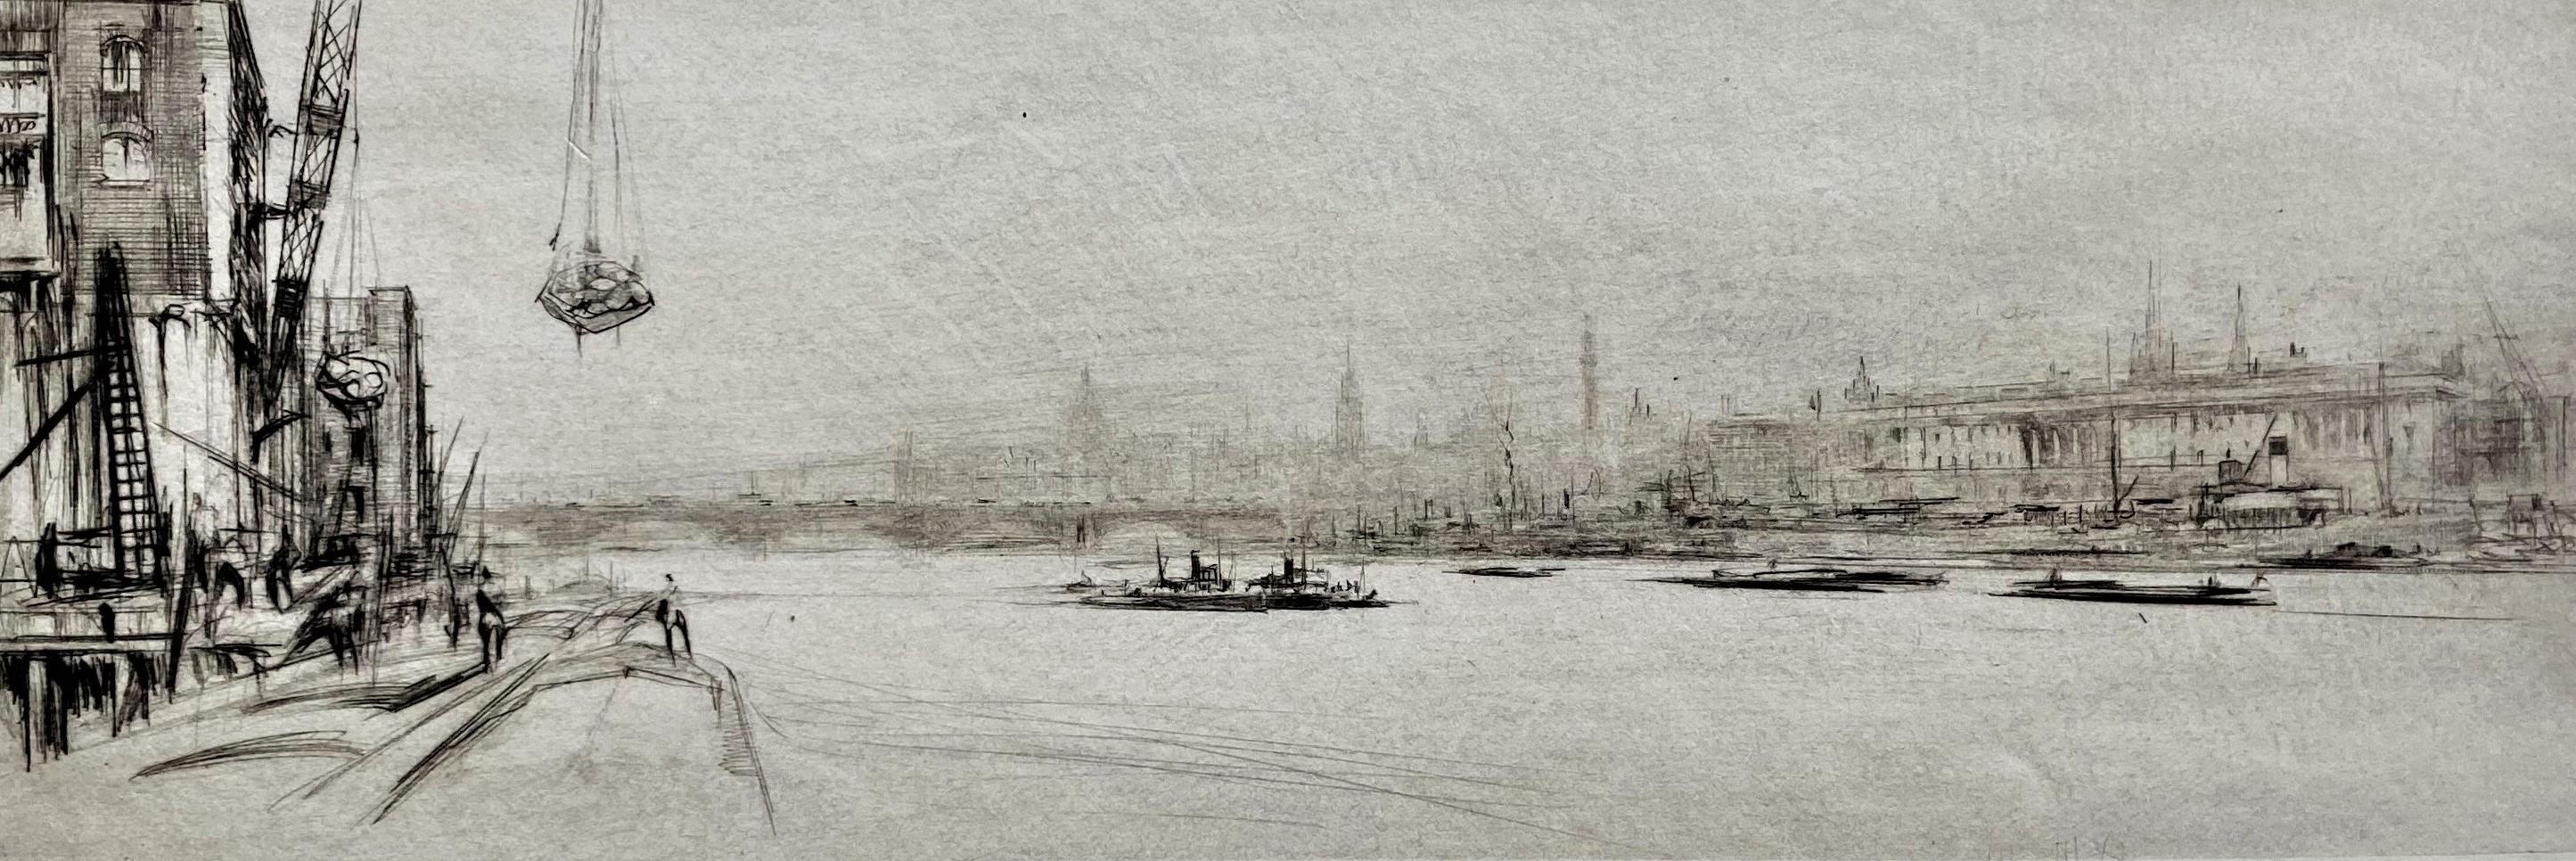 Loading Barges on the Thames - Gray Landscape Print by William Walcot, R.E., Hon.R.I.B.A.